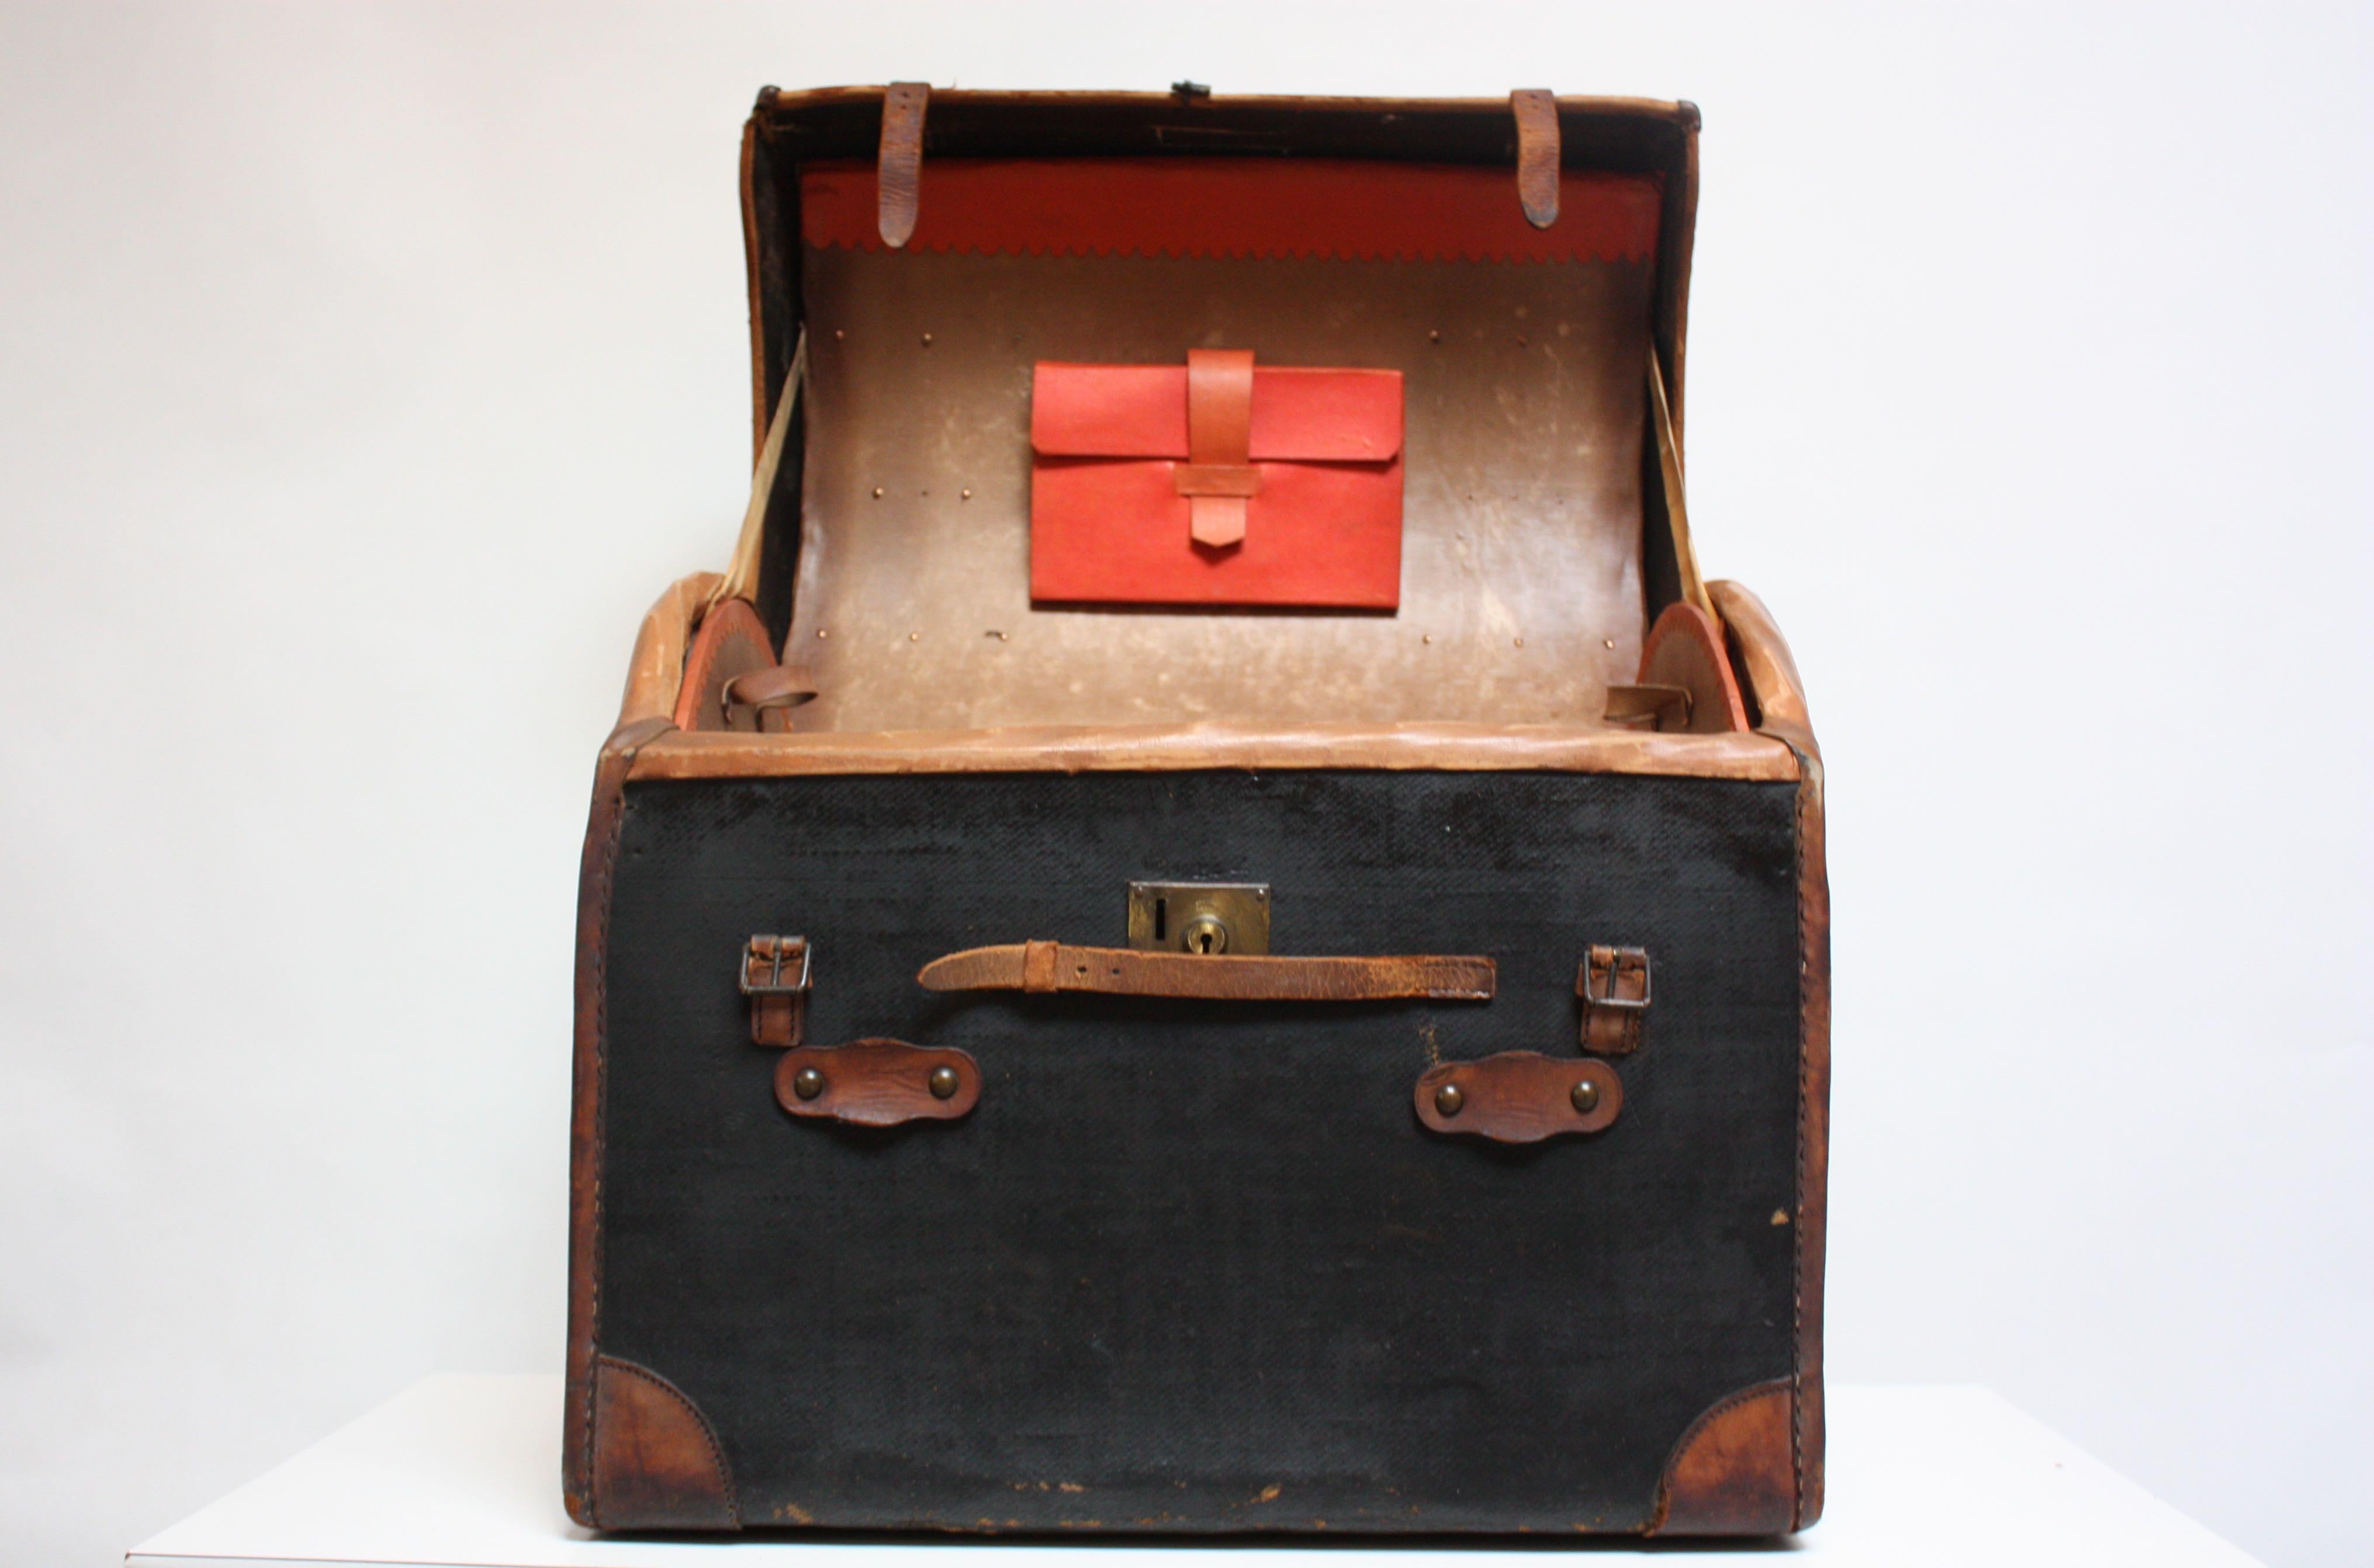 Unique steamer trunk (circa 1920s) composed of a heavy black canvas exterior with leather straps / accents and brass hardware. 
The interior red canvas 'folder' with leather clasp can accommodate pictures / documents. There is an interior tray,